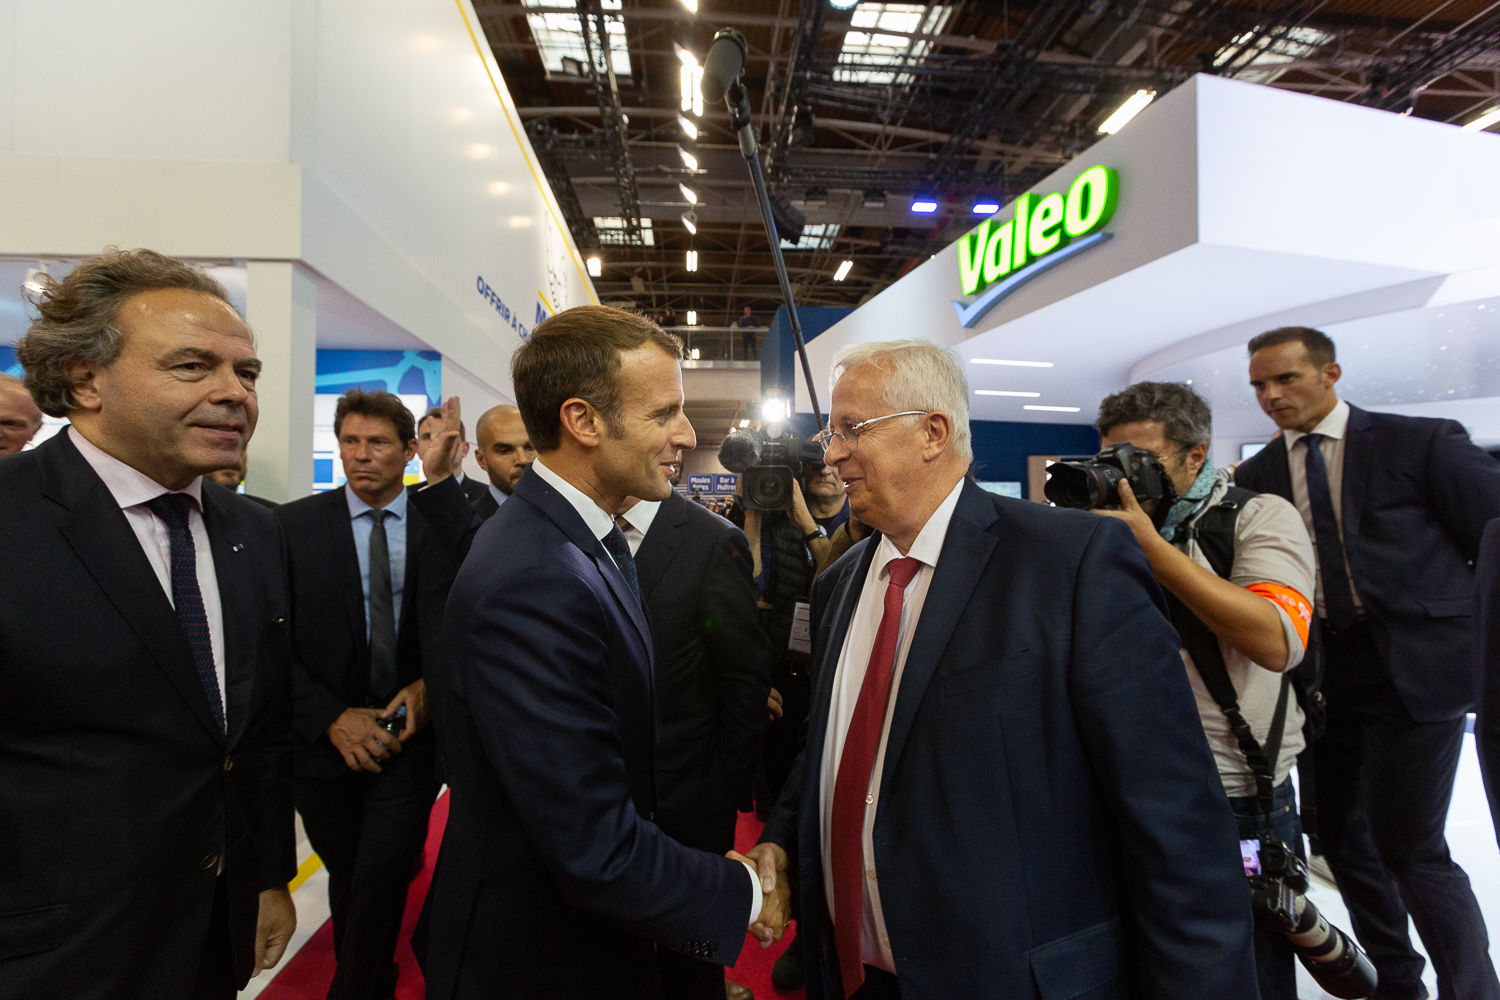 French President Emmanuel Macron with Valeo CEO Jacques Aschenbroich at an exhibition